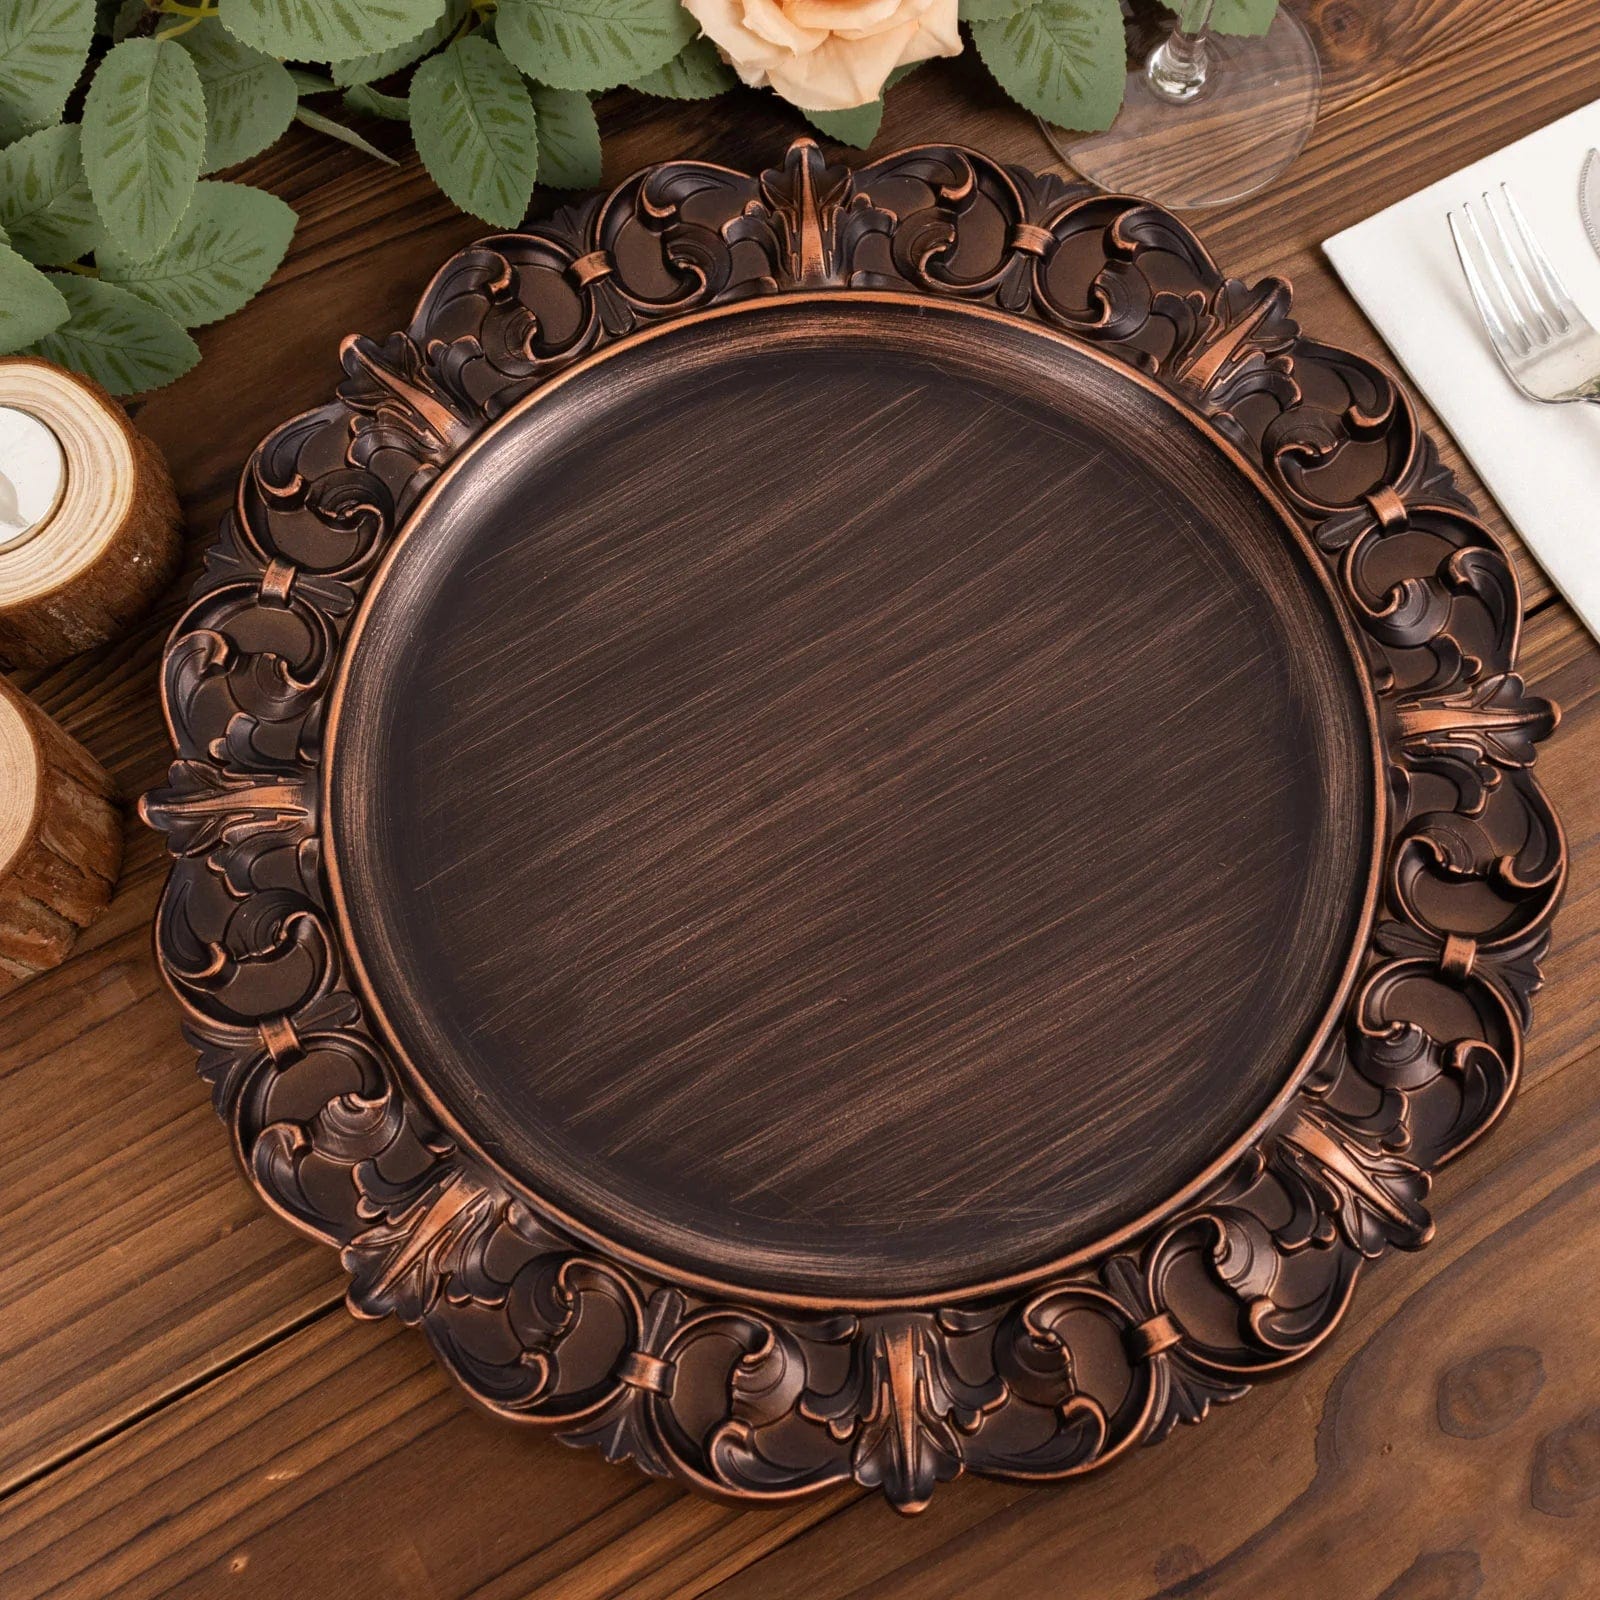 6 Dark Brown 13 in Aristocrat Style Round Charger Plates with Embossed Rim